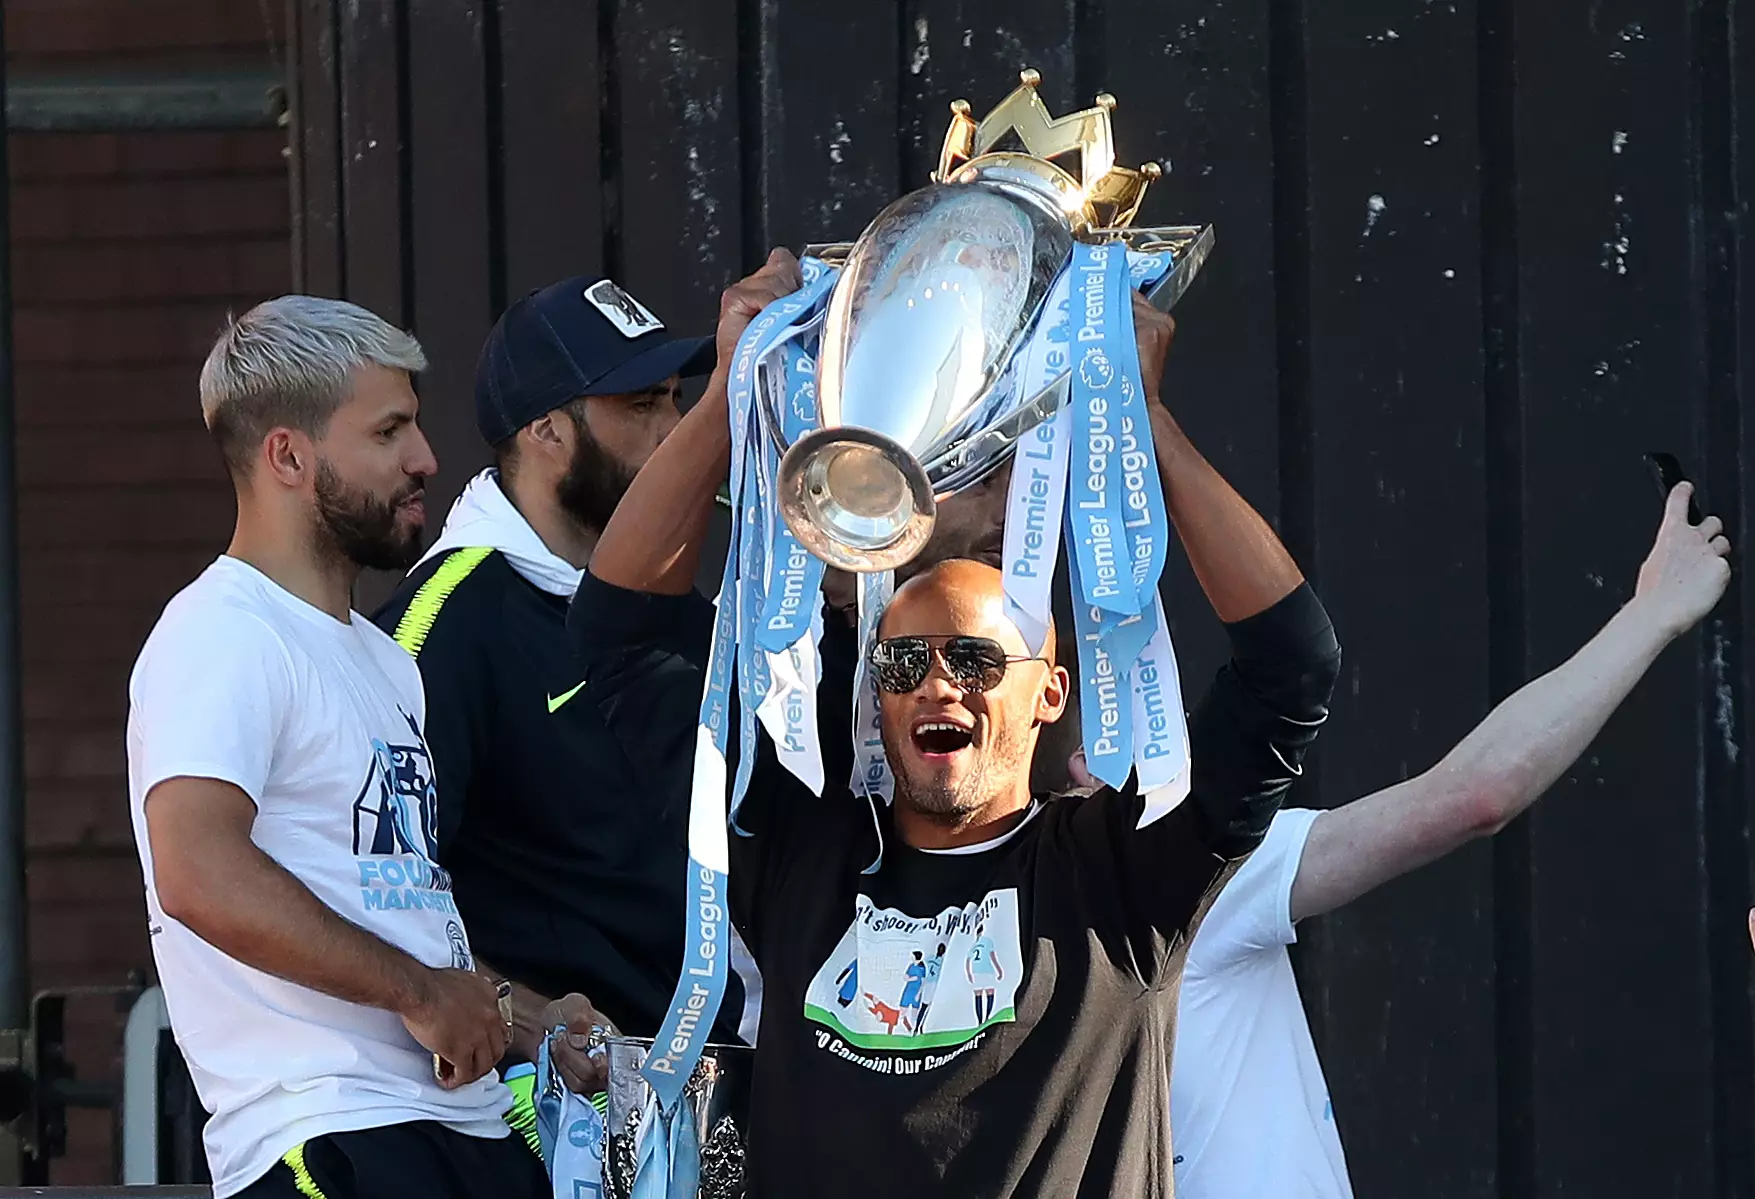 Manchester City were crowned Premier League champions after a thrilling title race